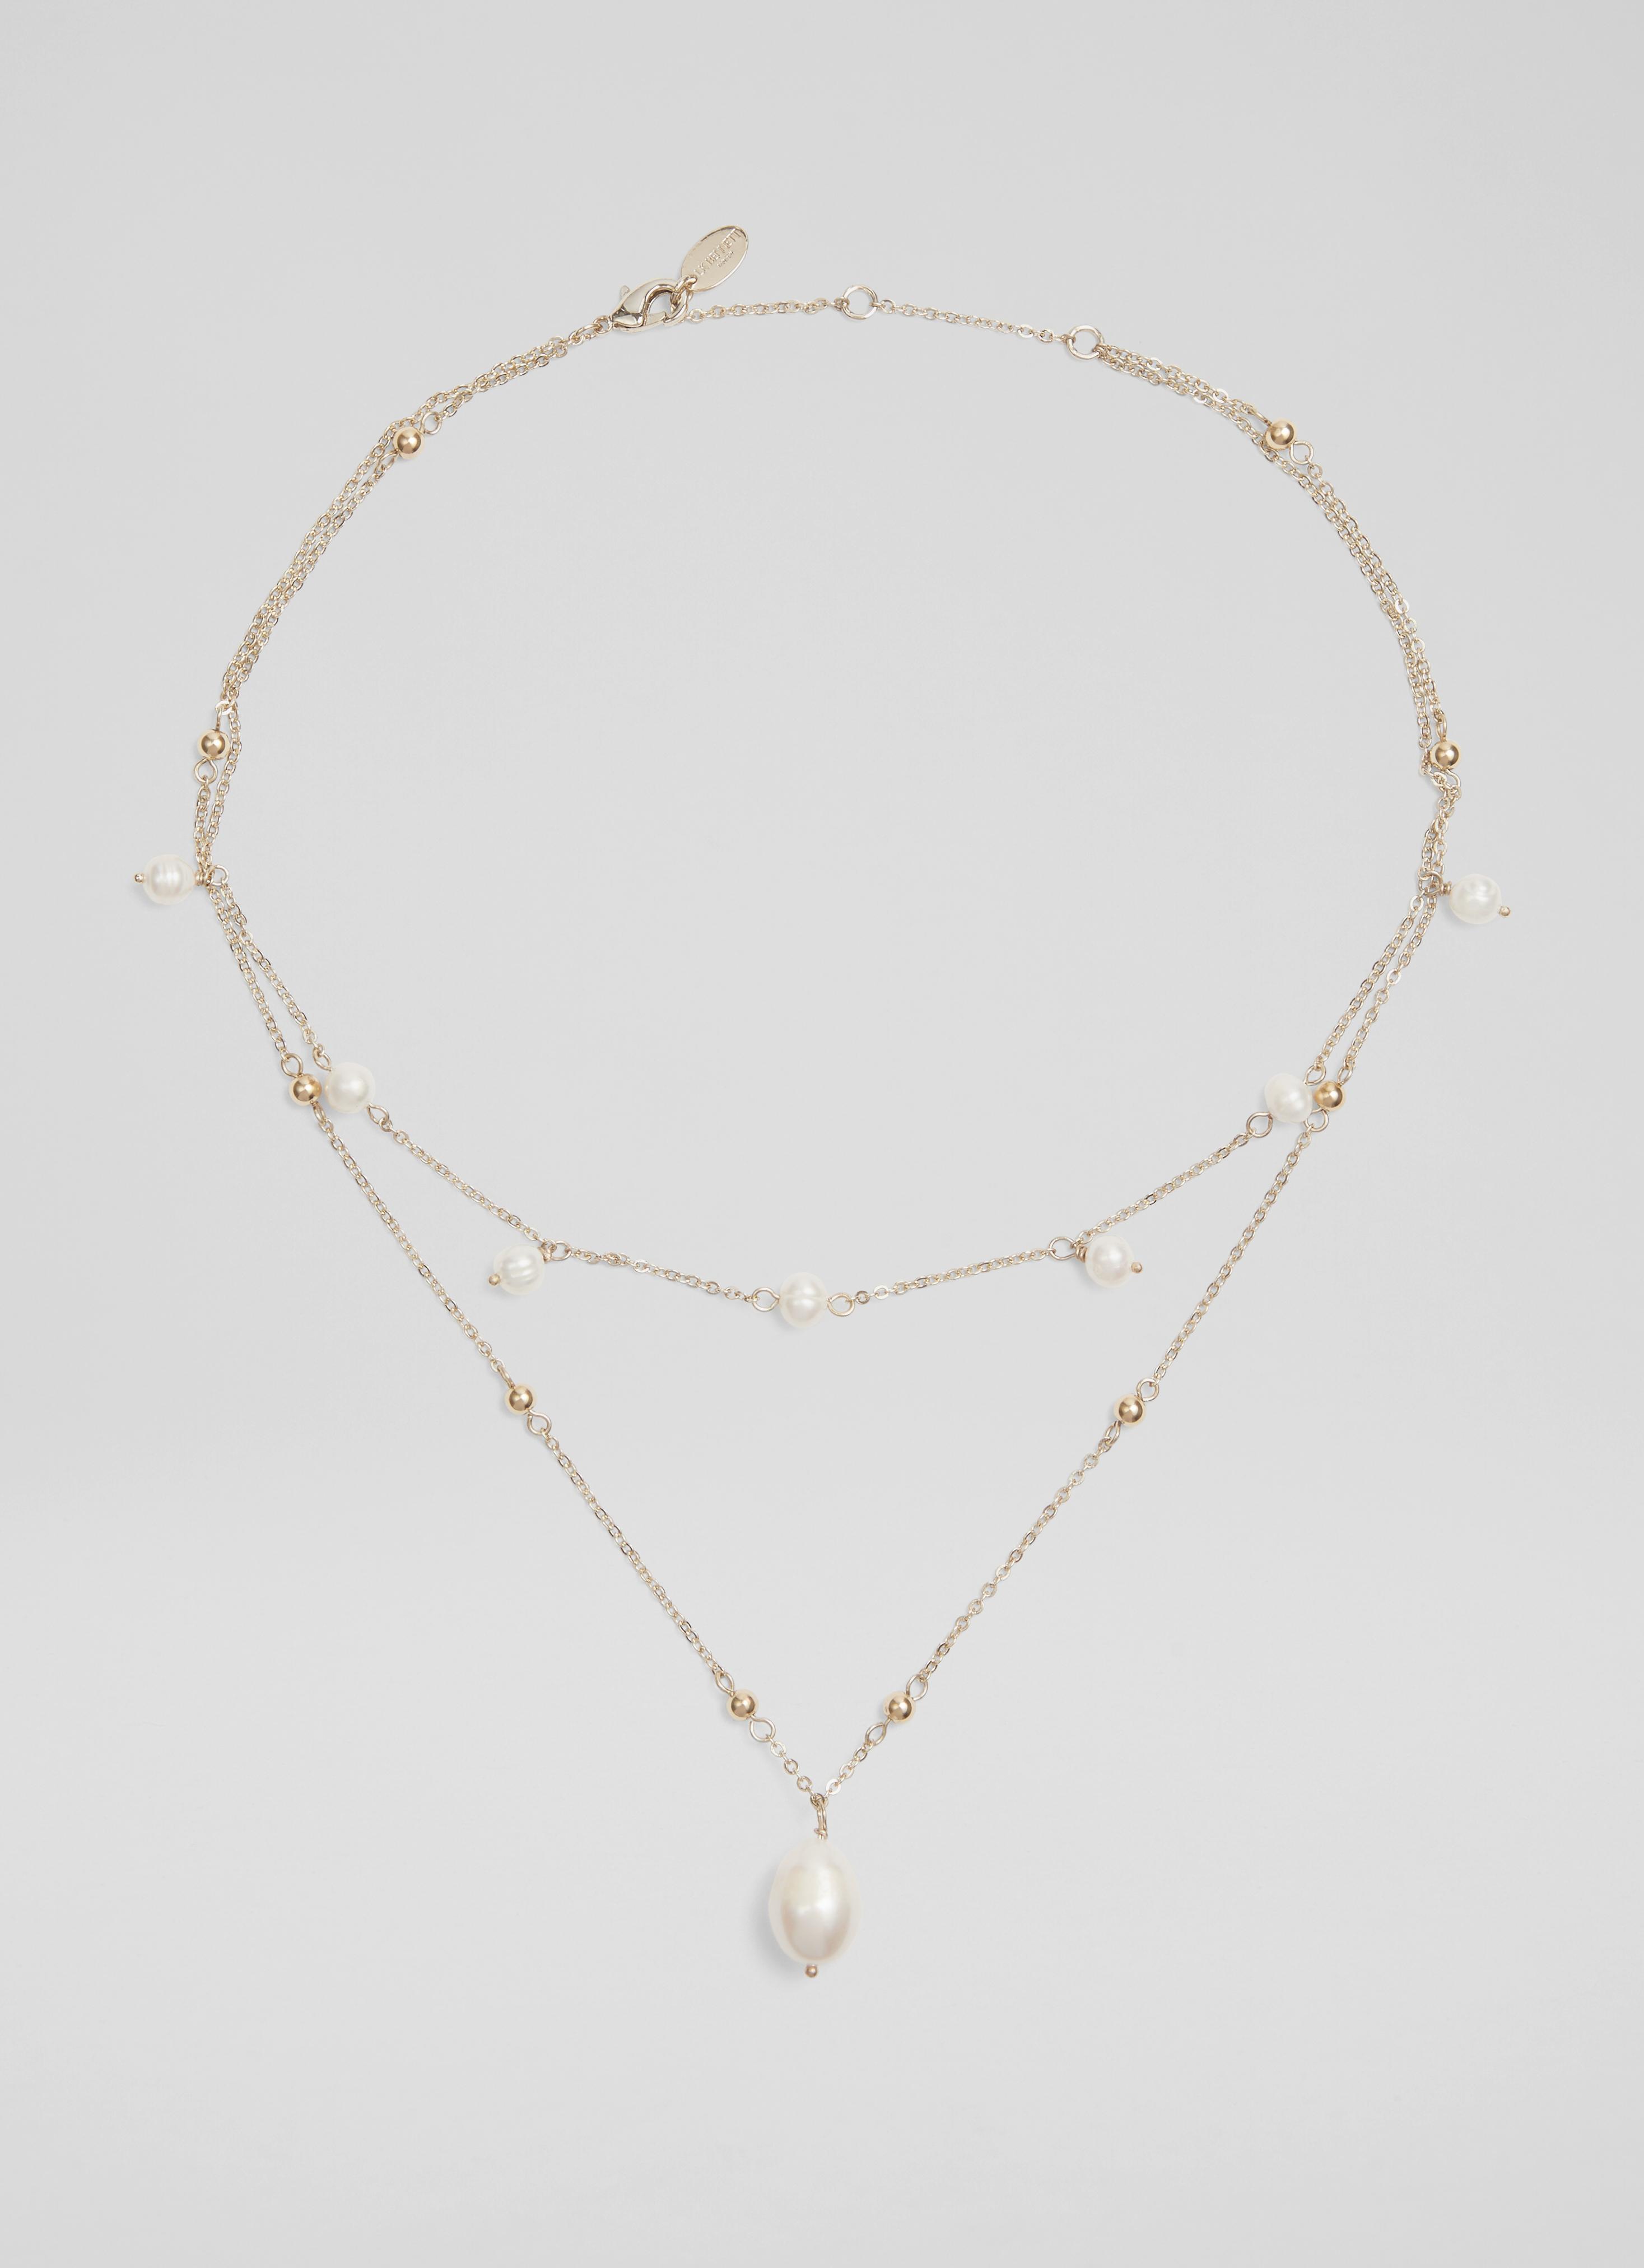 L.K.Bennett Clara Pearl and Gold Double Chain Necklace Cream Gold, Cream Gold